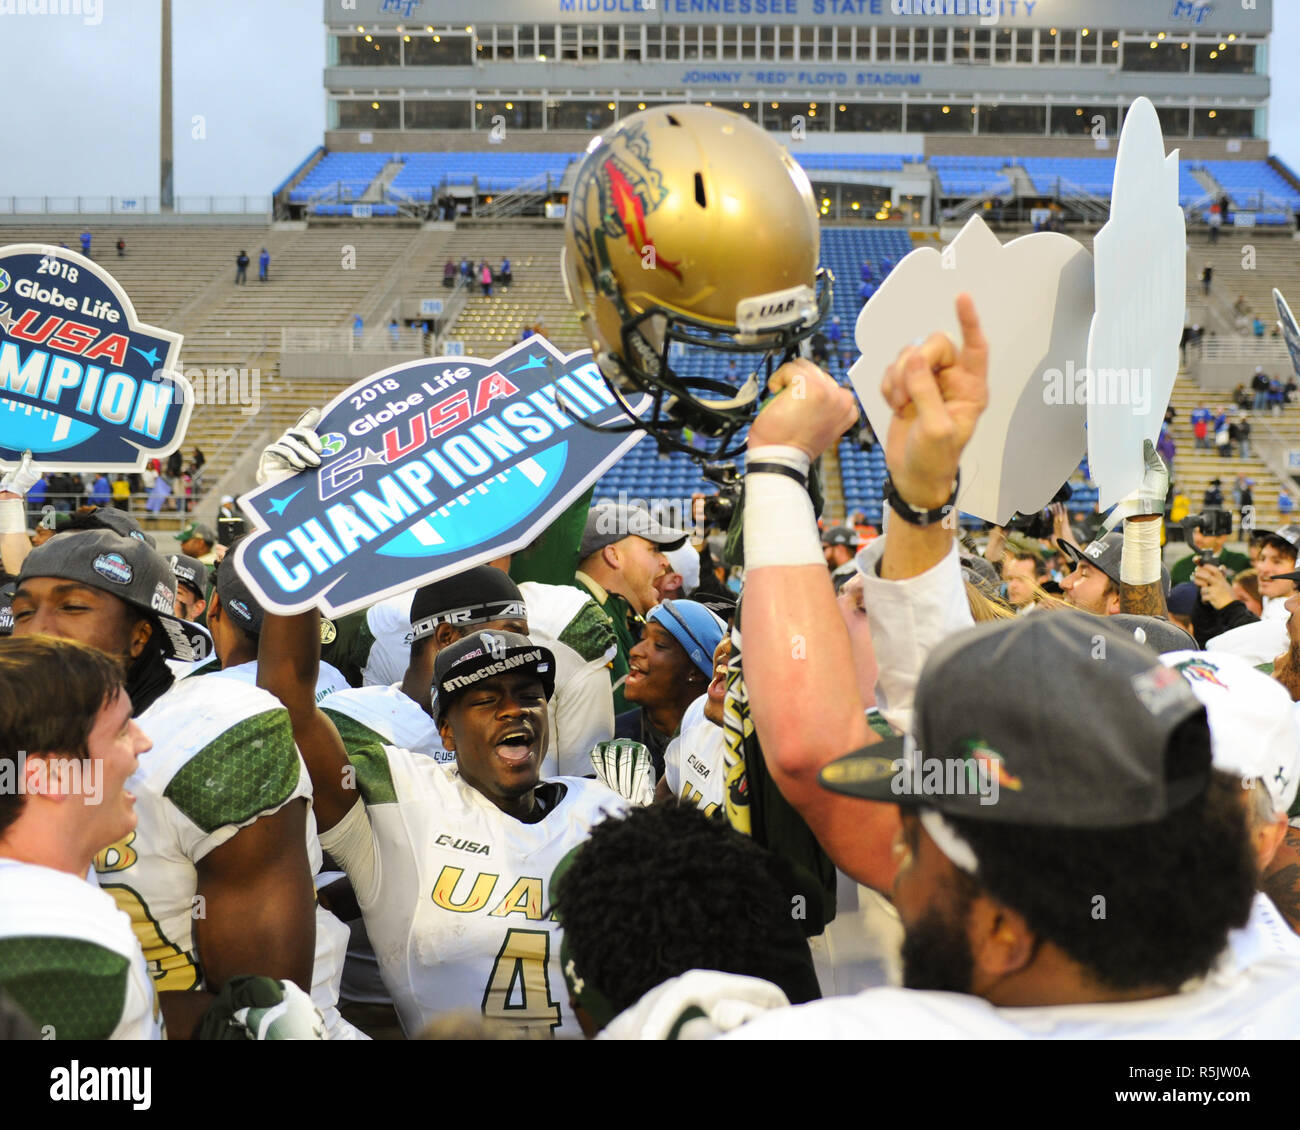 Murfreesboro, TN, USA. 01st Dec, 2018. UAB players celebrates victory after the C-USA Football Championship game between the Middle Tennessee Blue Raiders and the University of Alabama Birmingham Blazers at Johnny Floyd Stadium in Murfreesboro, TN. UAB defeated Middle Tennessee, 27-25. Kevin Langley/CSM/Alamy Live News Stock Photo